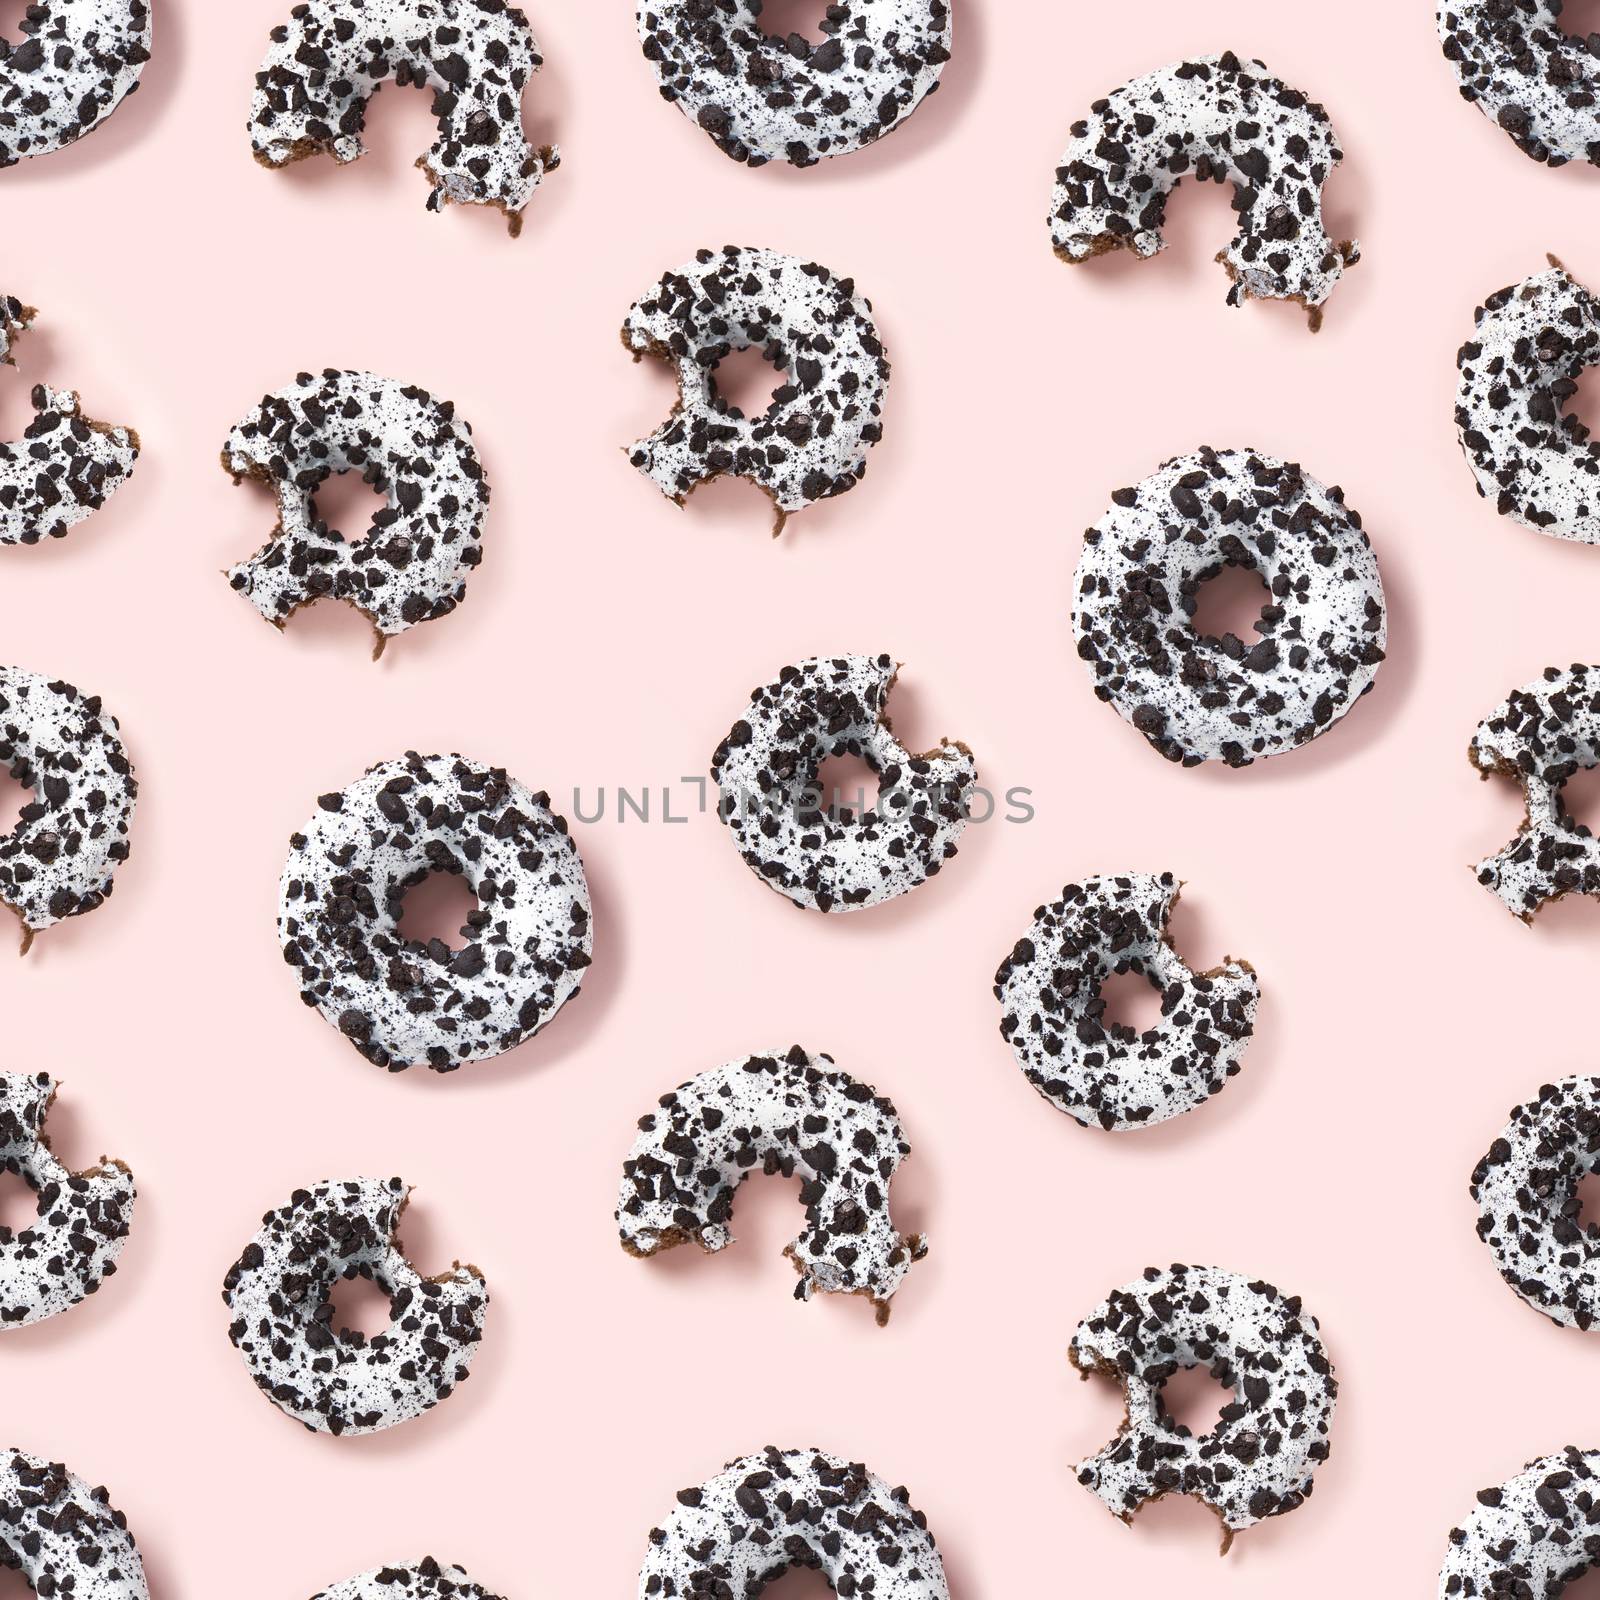 quality seamless pattern of donuts on a pink background top view. Flat lay of delicious nibbled chocolate donuts. by PhotoTime